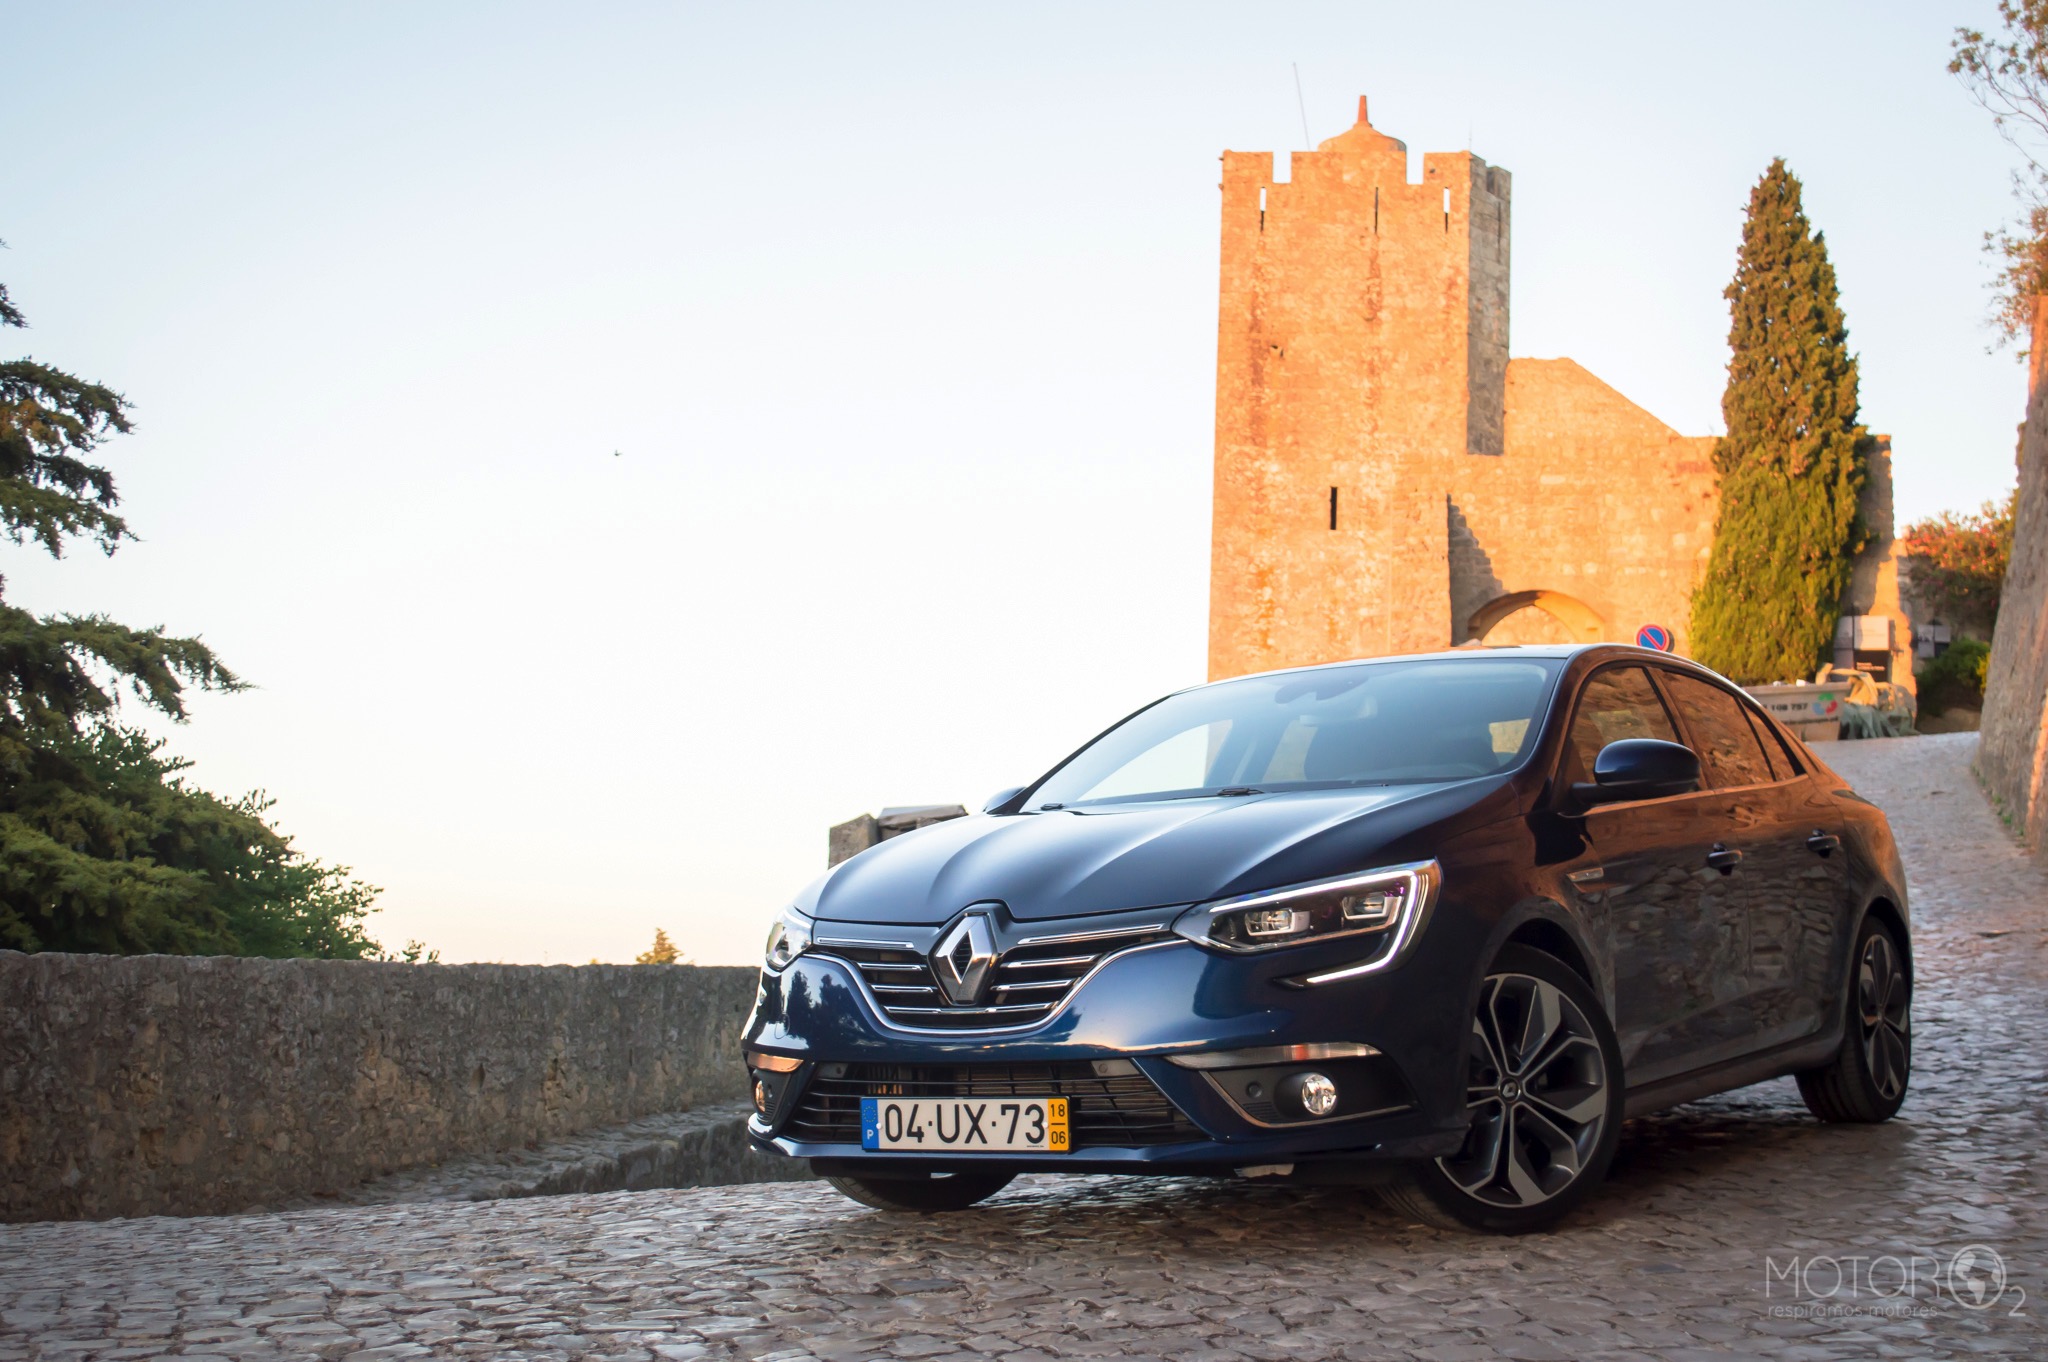 Renault Megane Grand Coupe 1.6 dCi 130